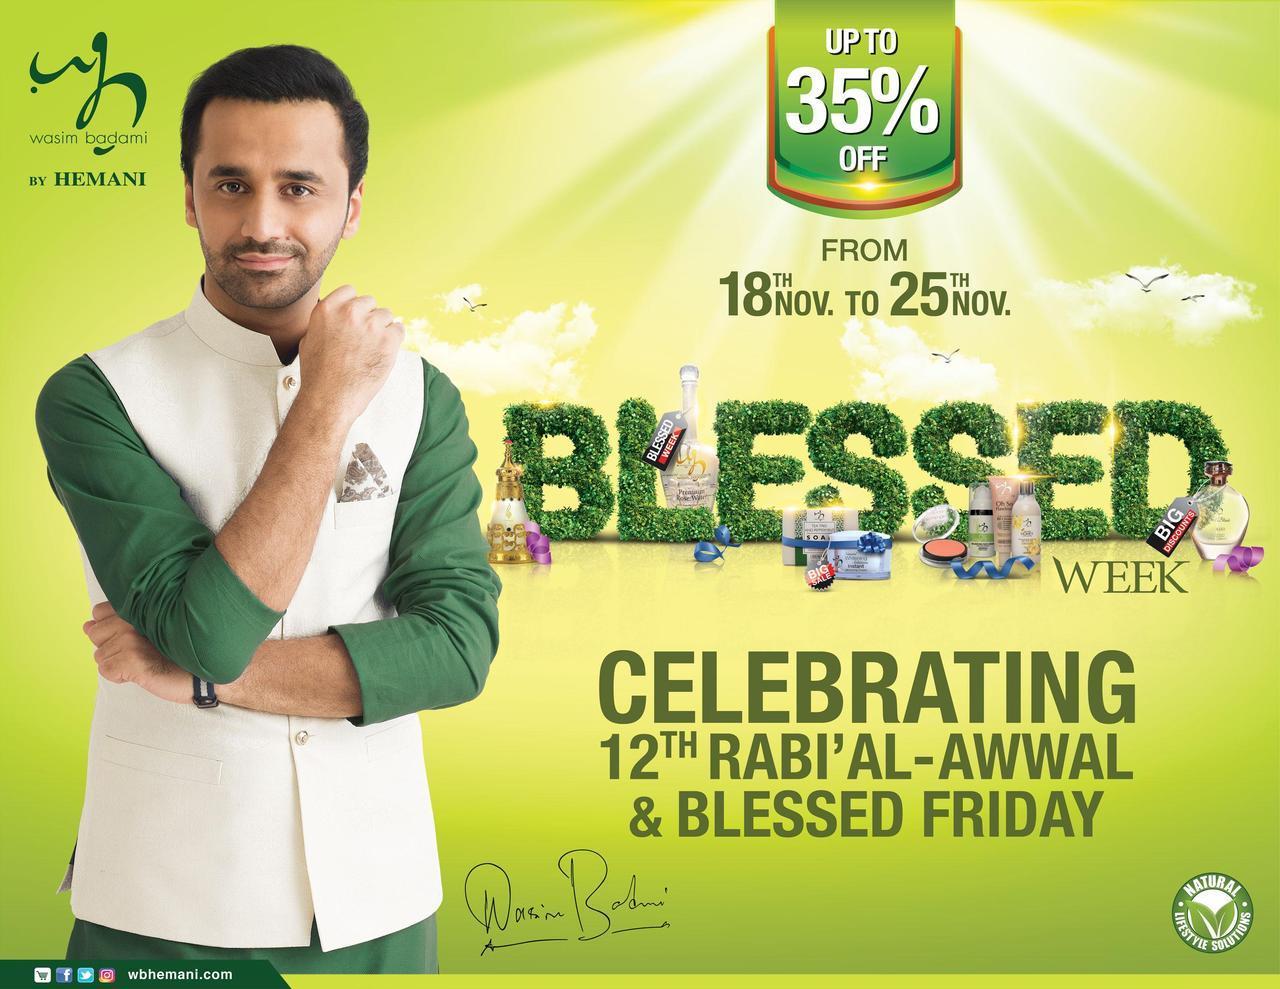 WB by Hemani Announces “Blessed Week” Discounts Get up to 35% off on all WB products